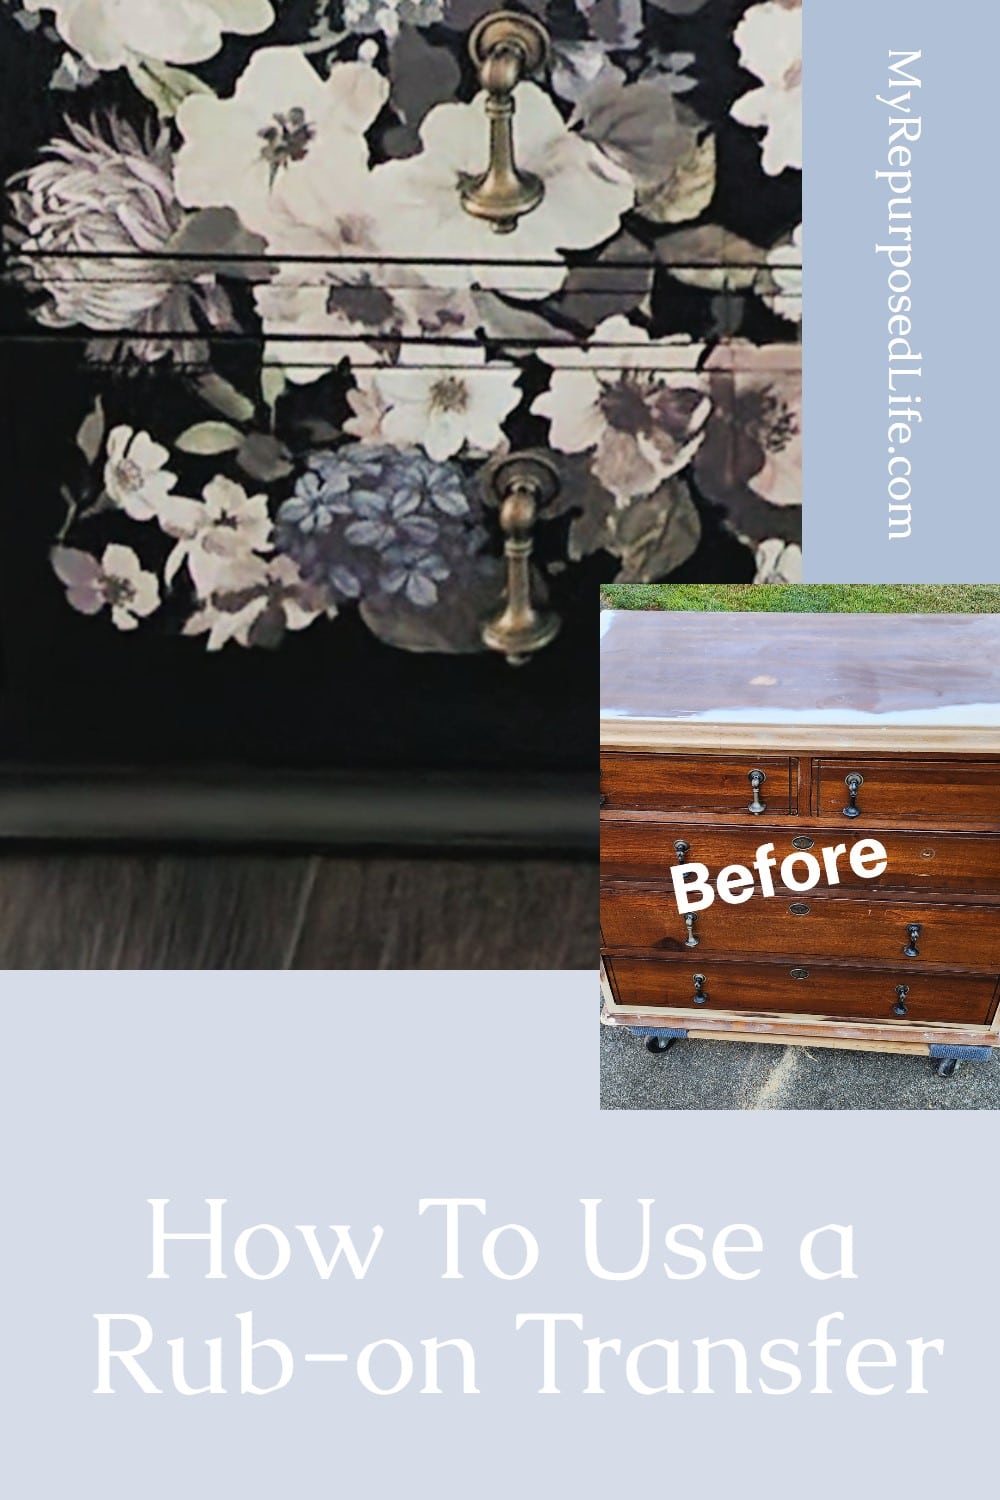 How to save an old piece of furniture and update it with a Prima Design Furniture Transfer. A beginner explains how easy it is to do. via @repurposedlife